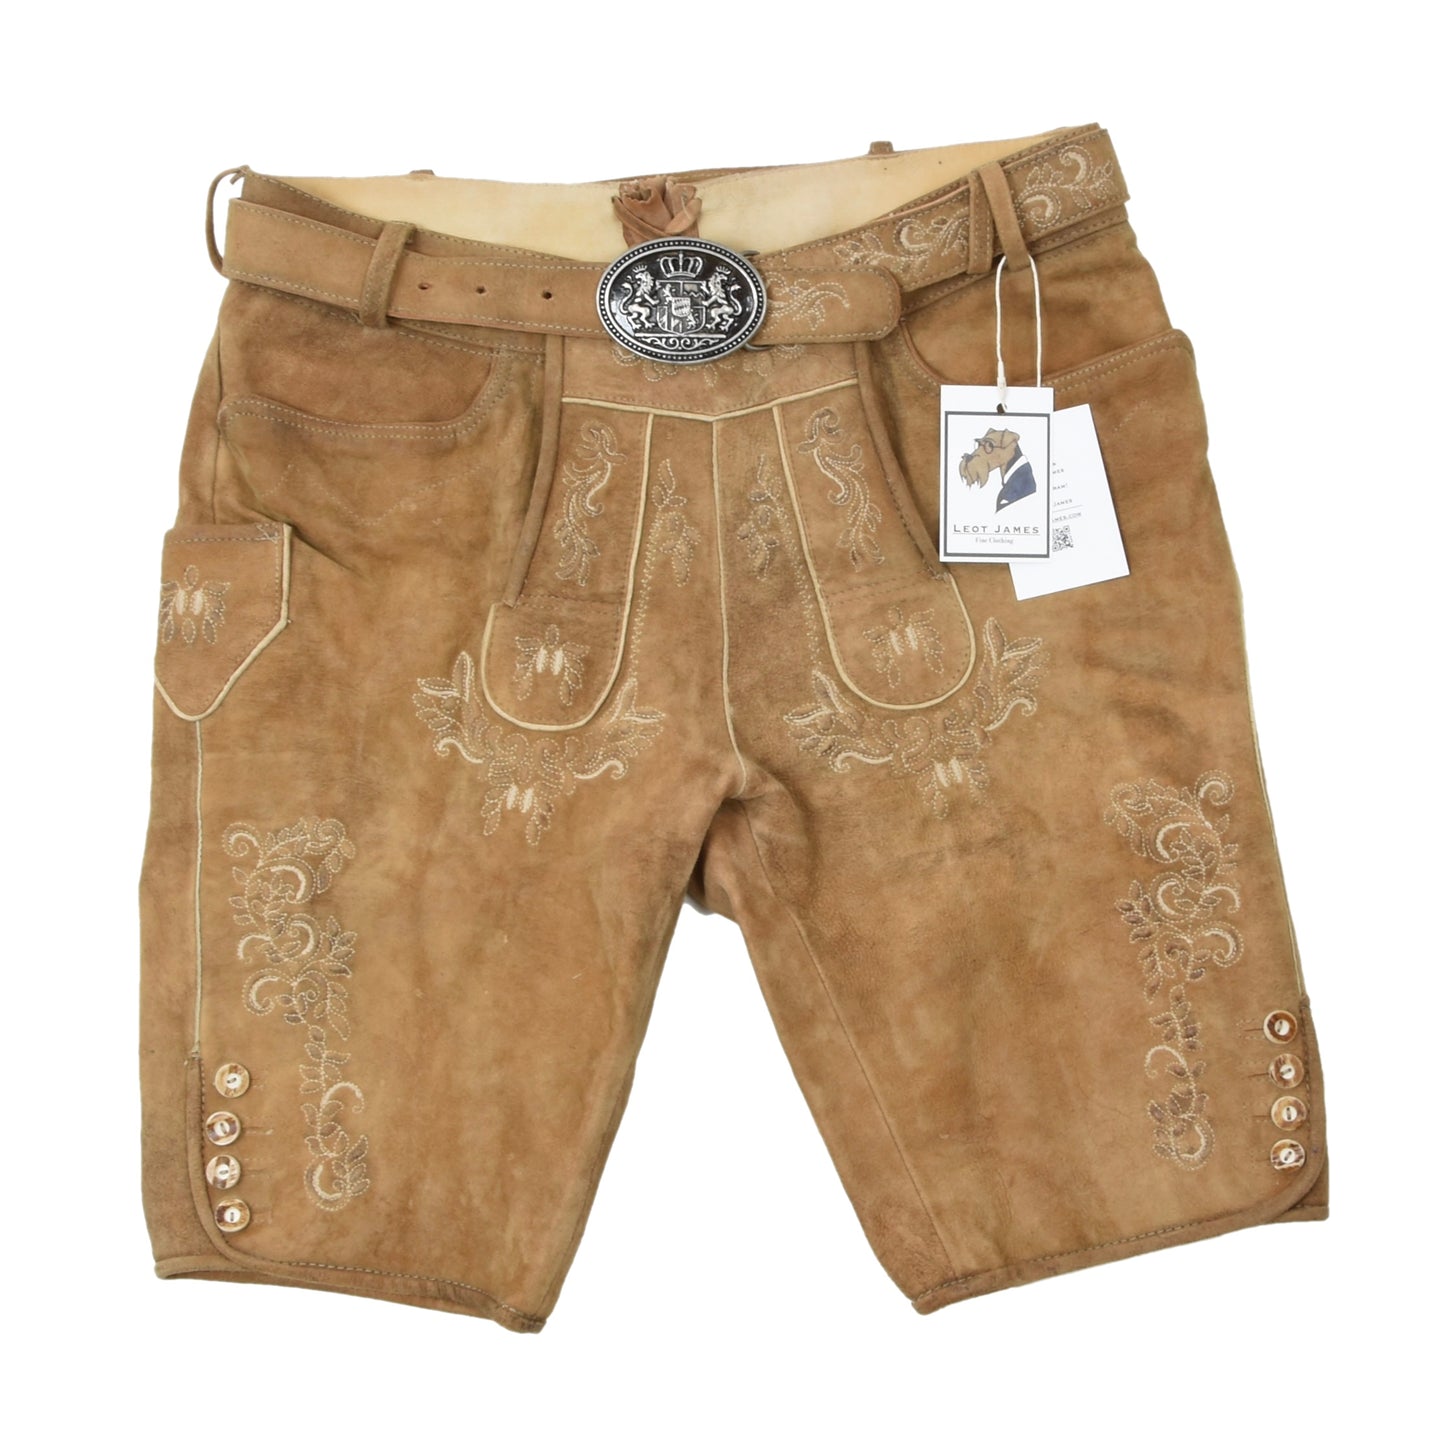 Country Maddox Suede Lederhose Size 48 - Tan